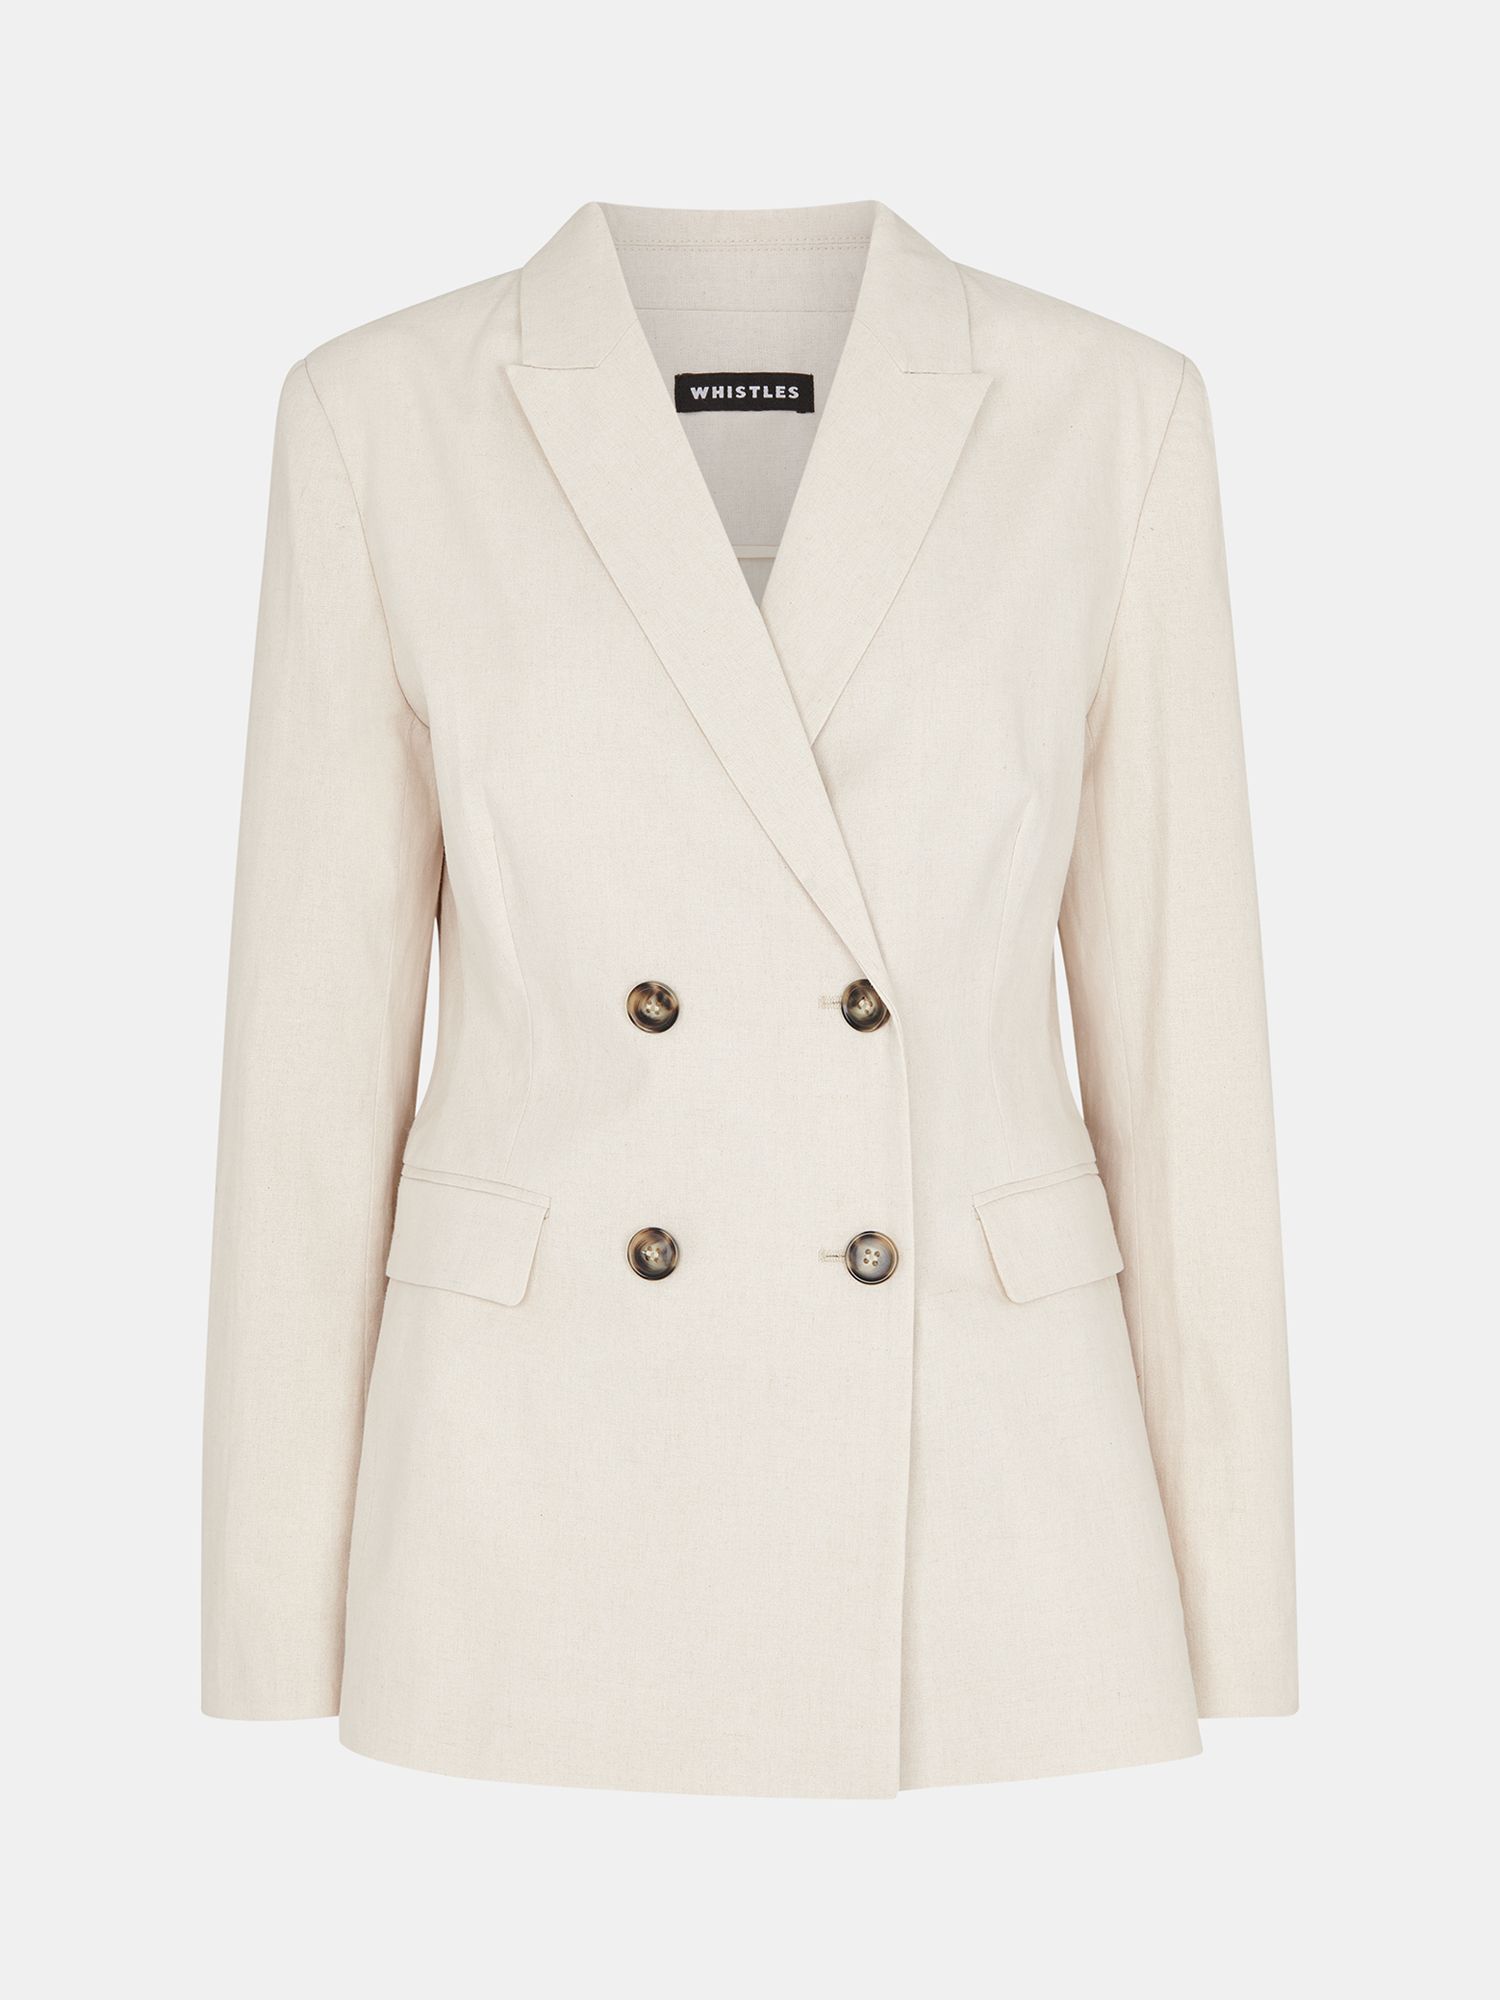 Buy Whistles Lindsey Linen Blend Double Breasted Suit Blazer Online at johnlewis.com